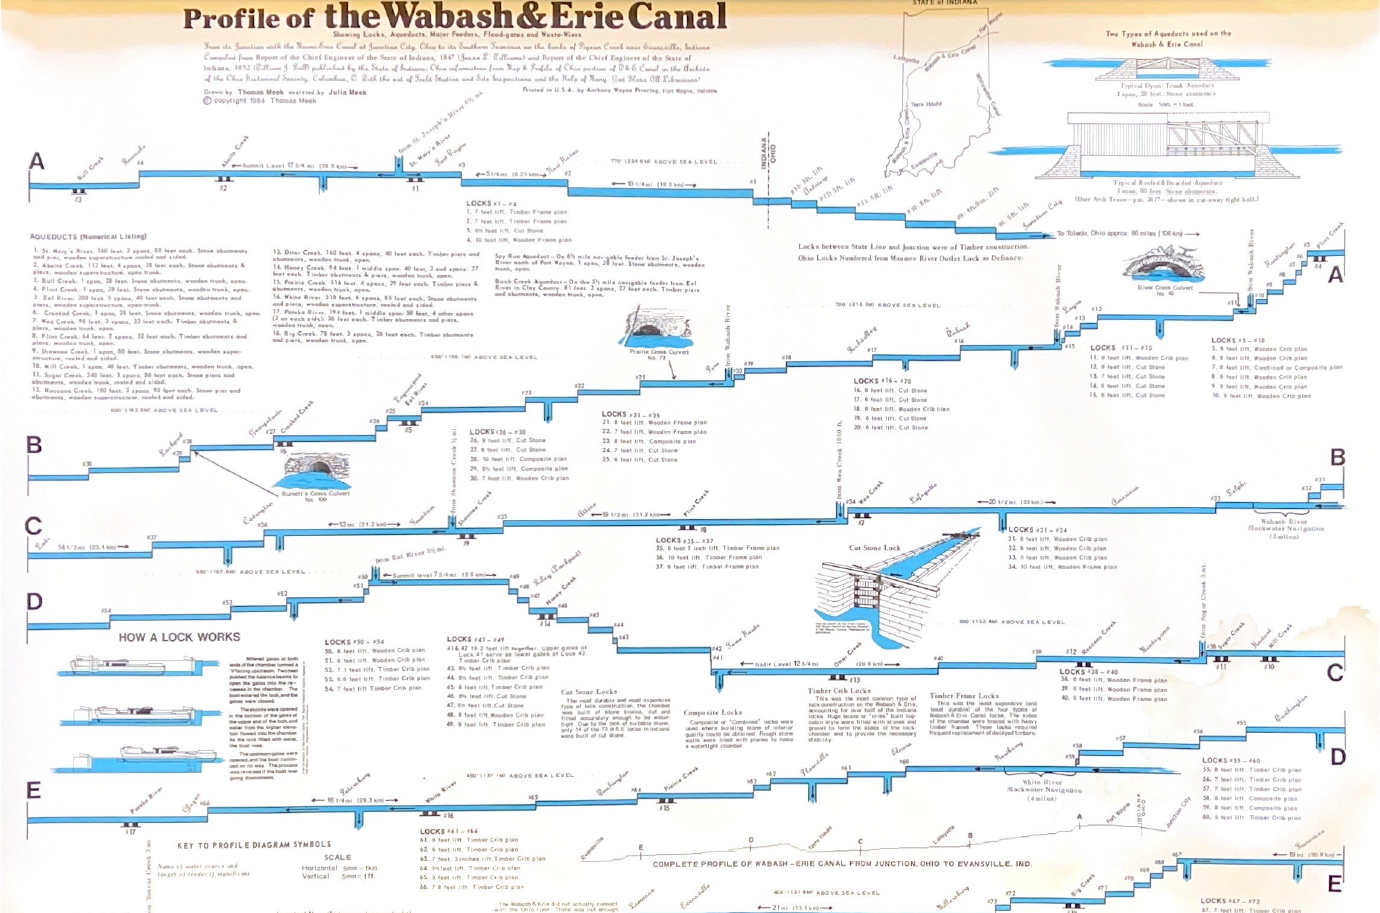 An elevation profile map of the Wabash & Erie Canal from Lake Erie to Evansville, Indiana.